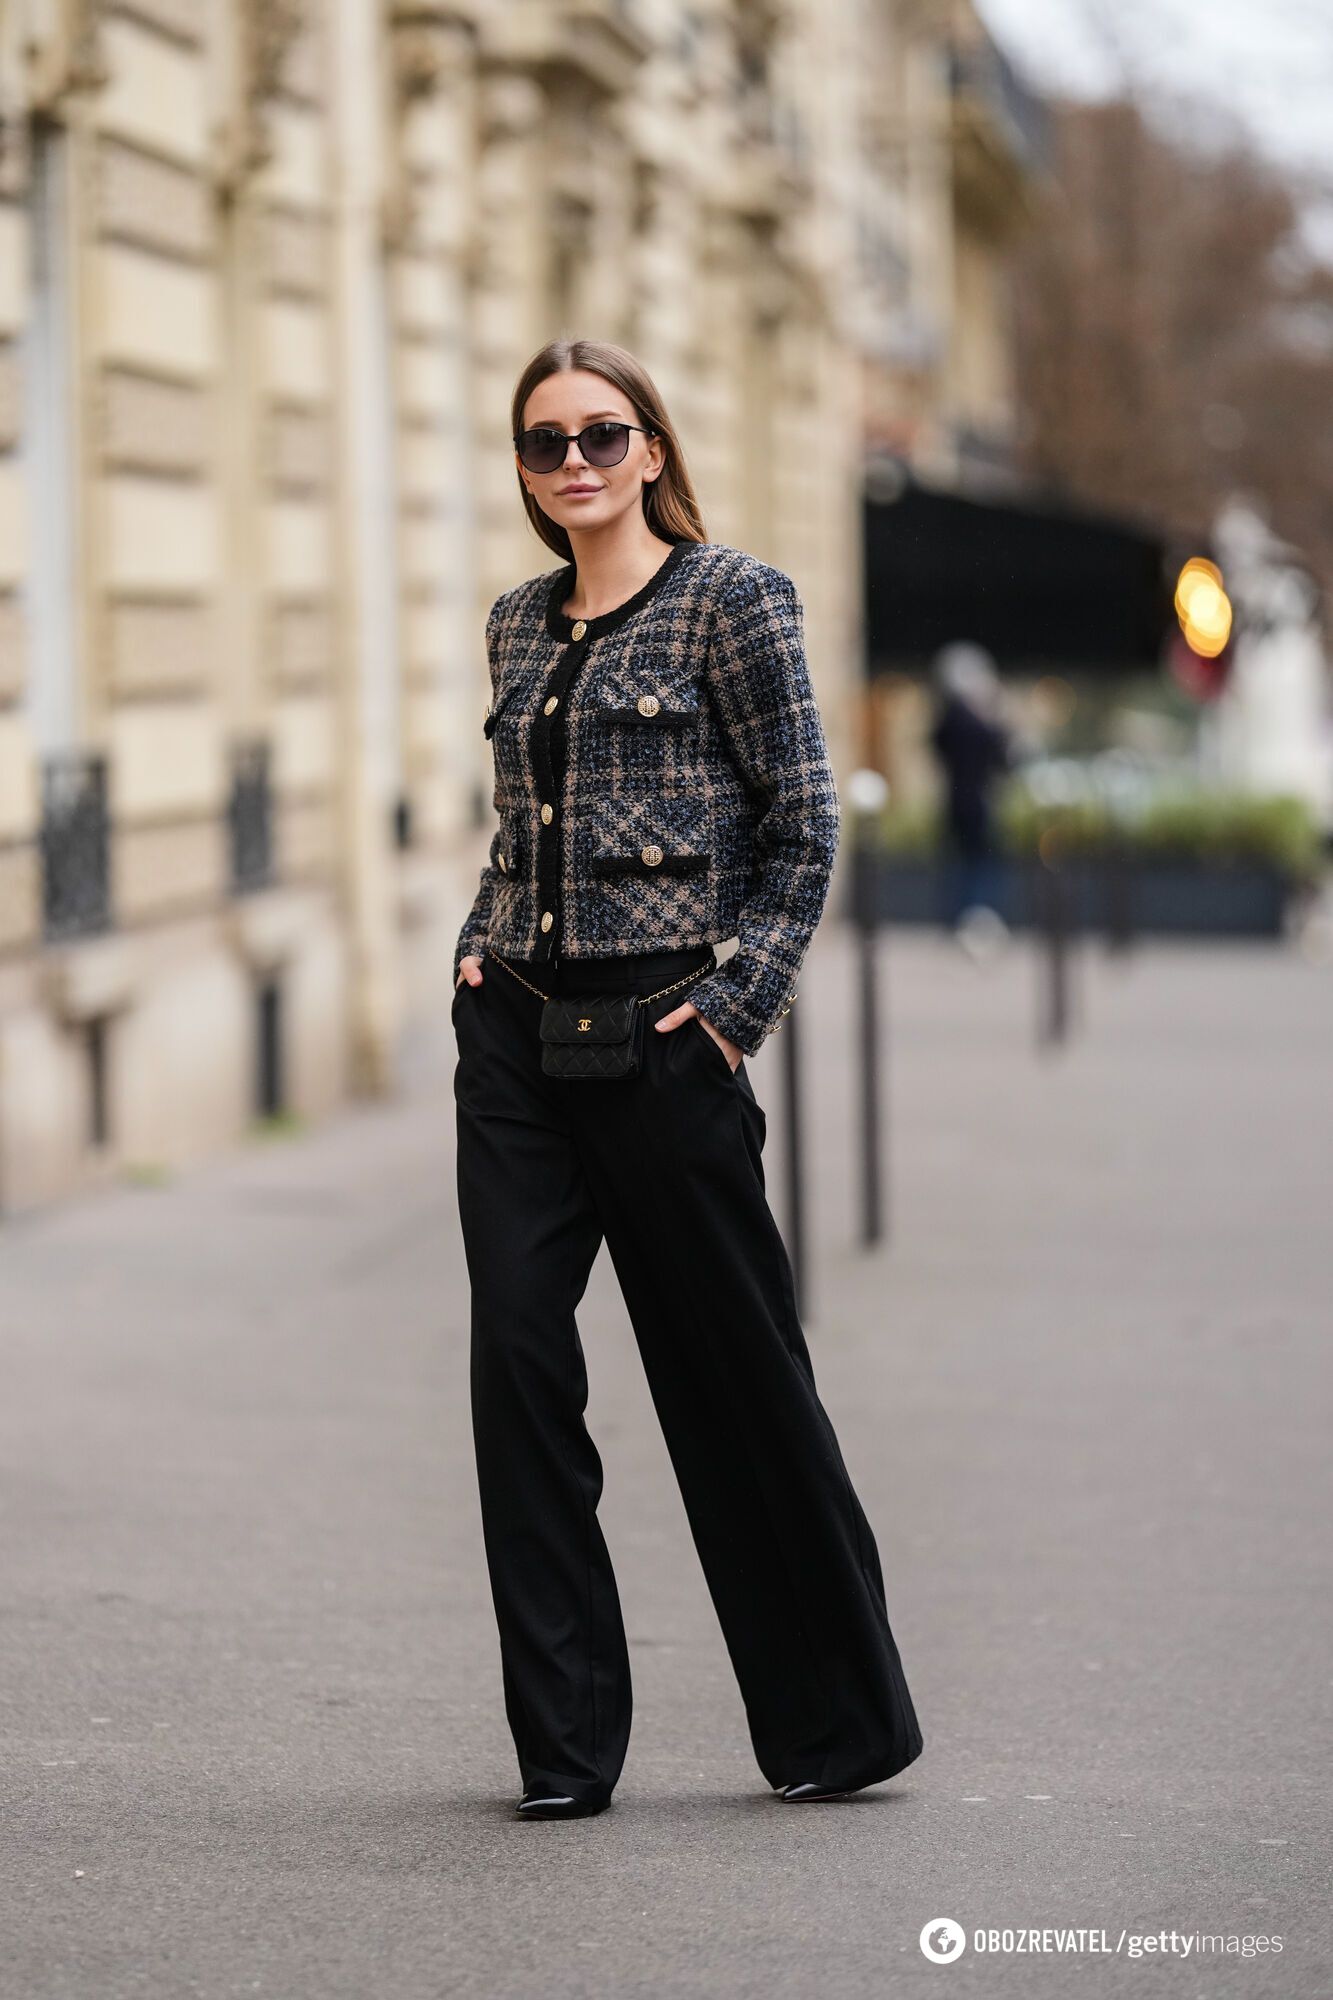 What to wear pants with in winter: 5 interesting ideas that you'll want to repeat